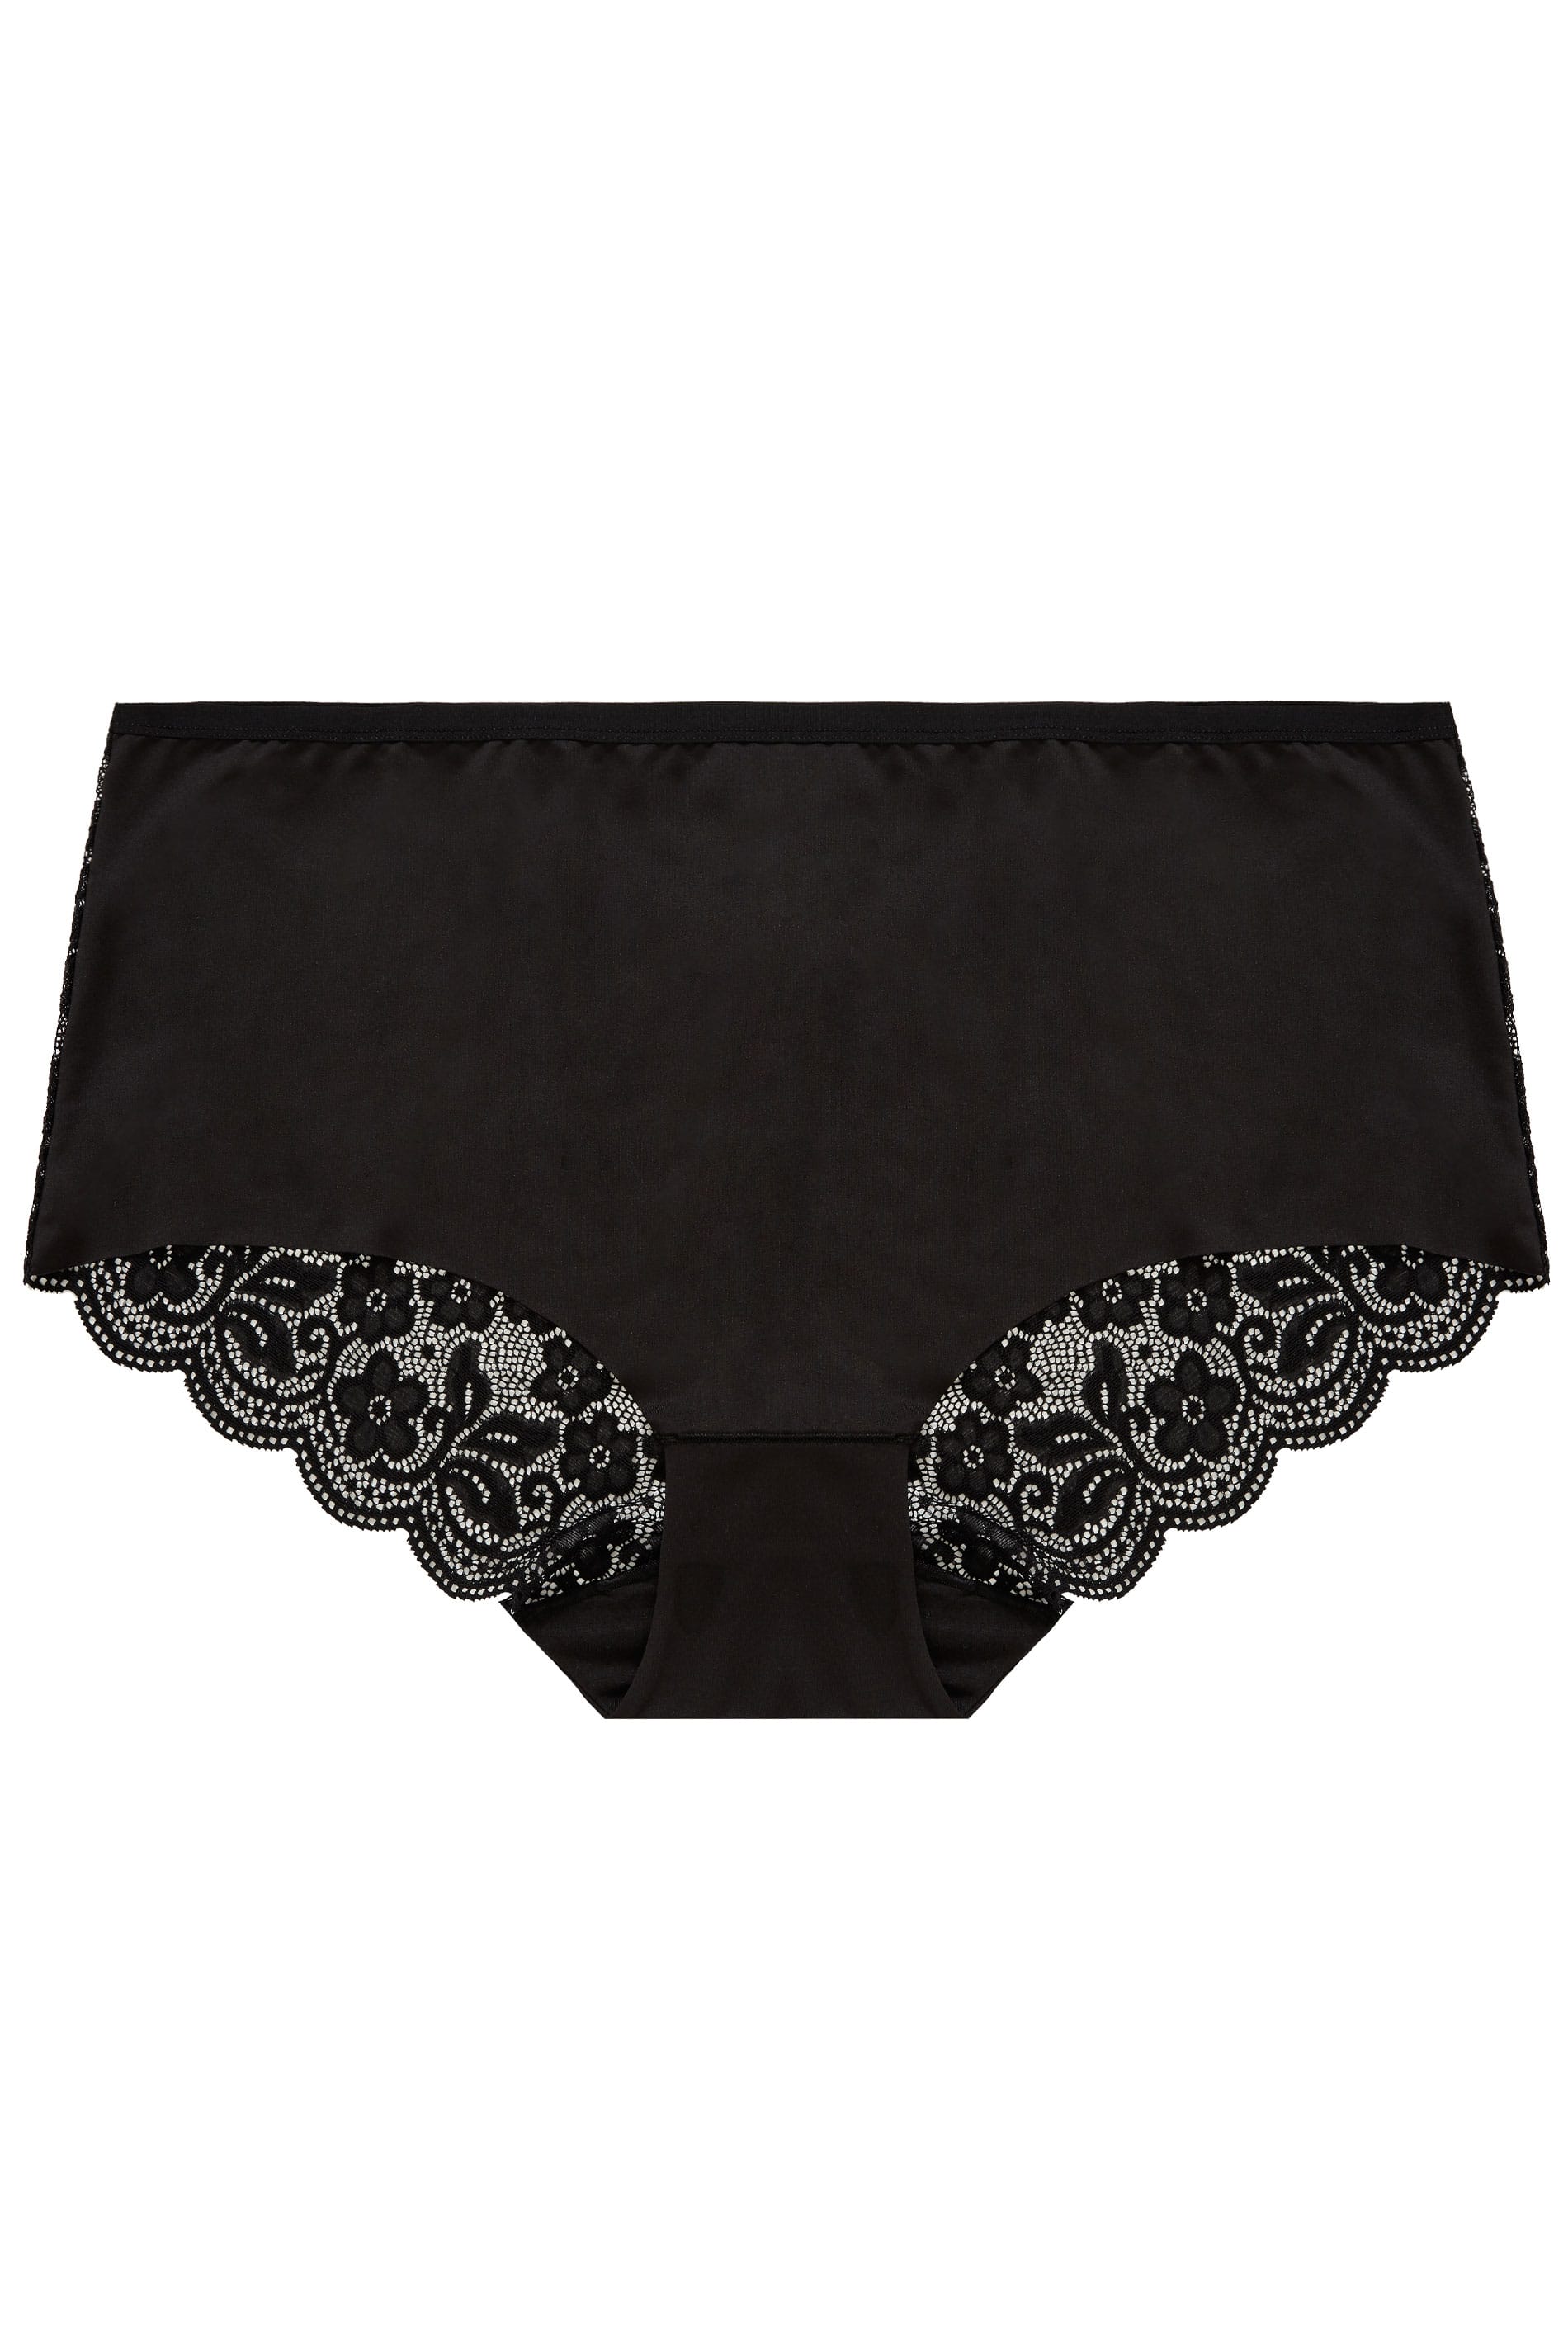 Black Lace Back Full High Waisted Knickers | Yours Clothing 3